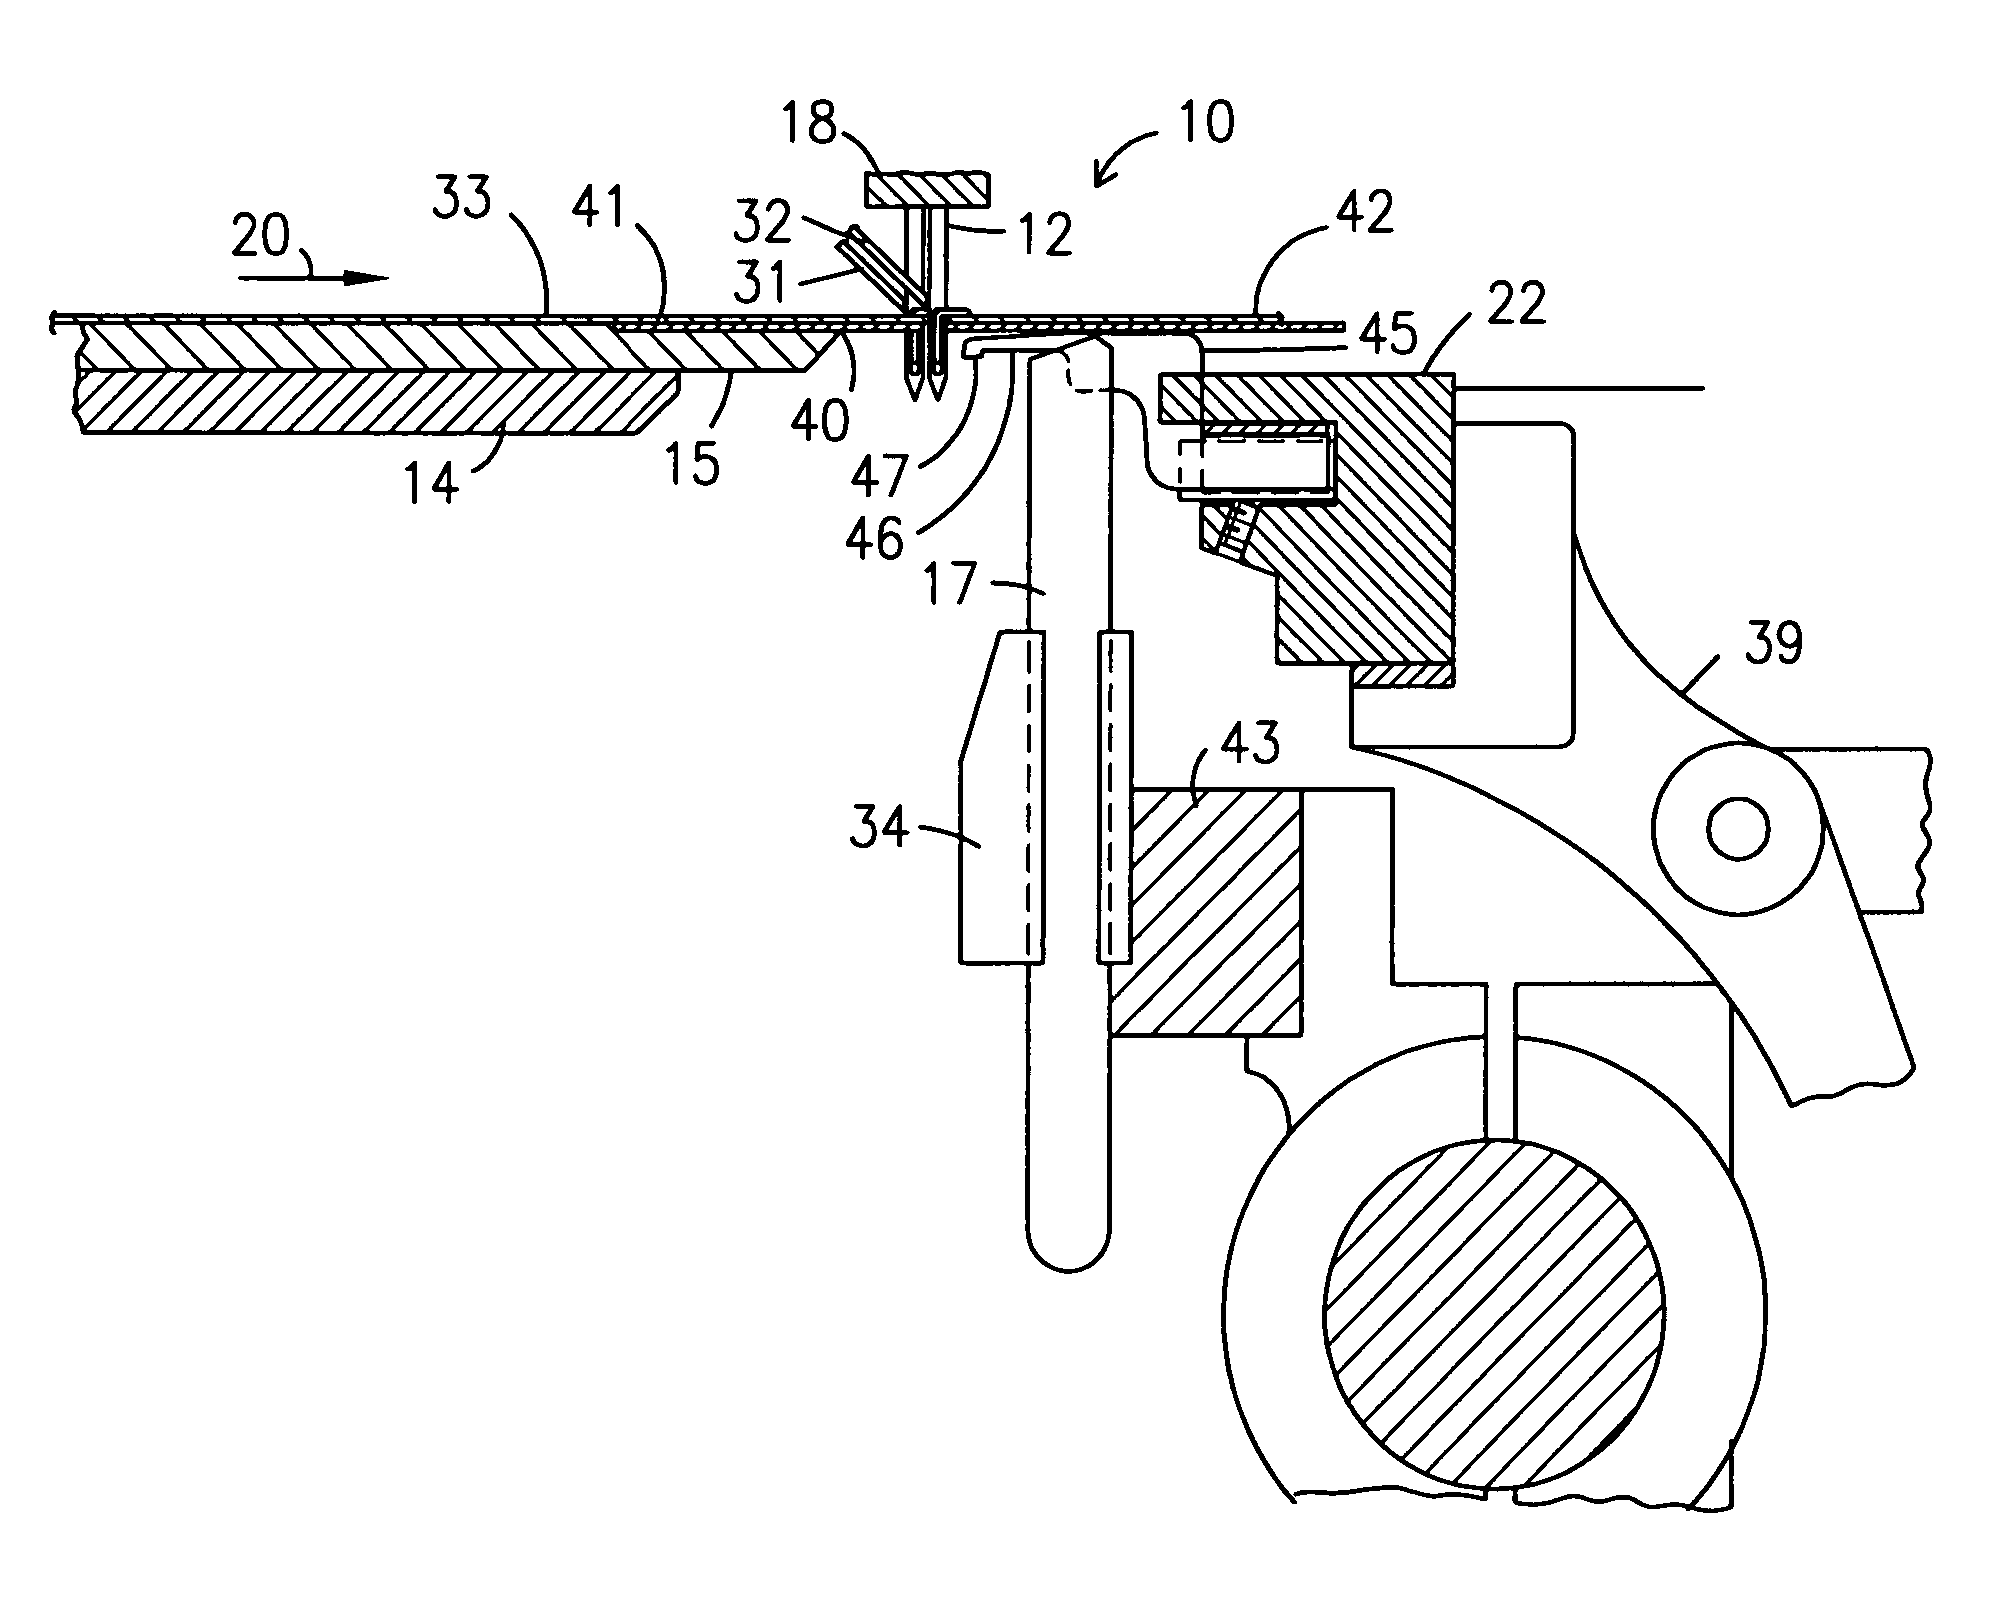 Tufting machine and process for variable stitch rate tufting